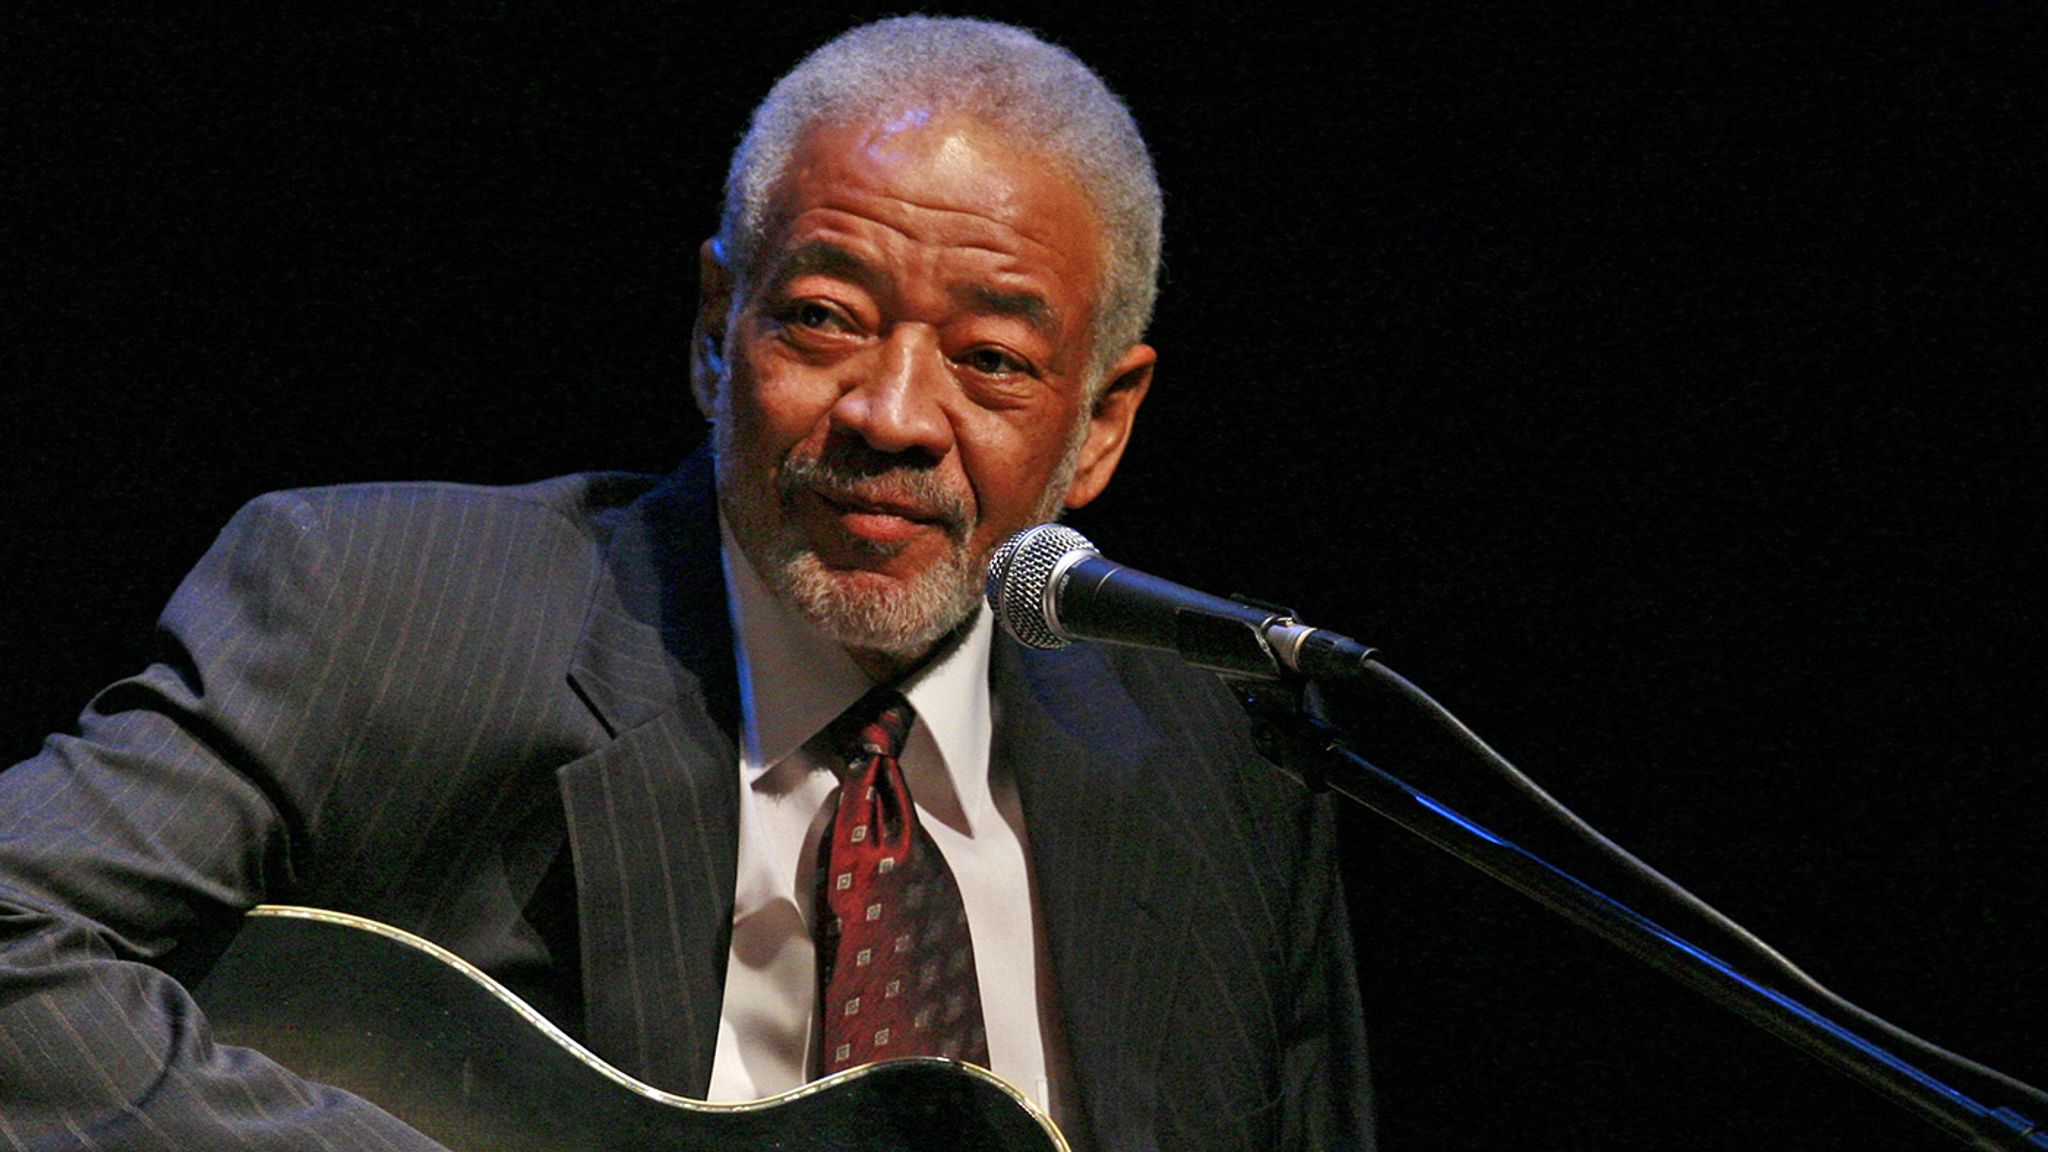 Bill Withers dies of heart complications. Net.